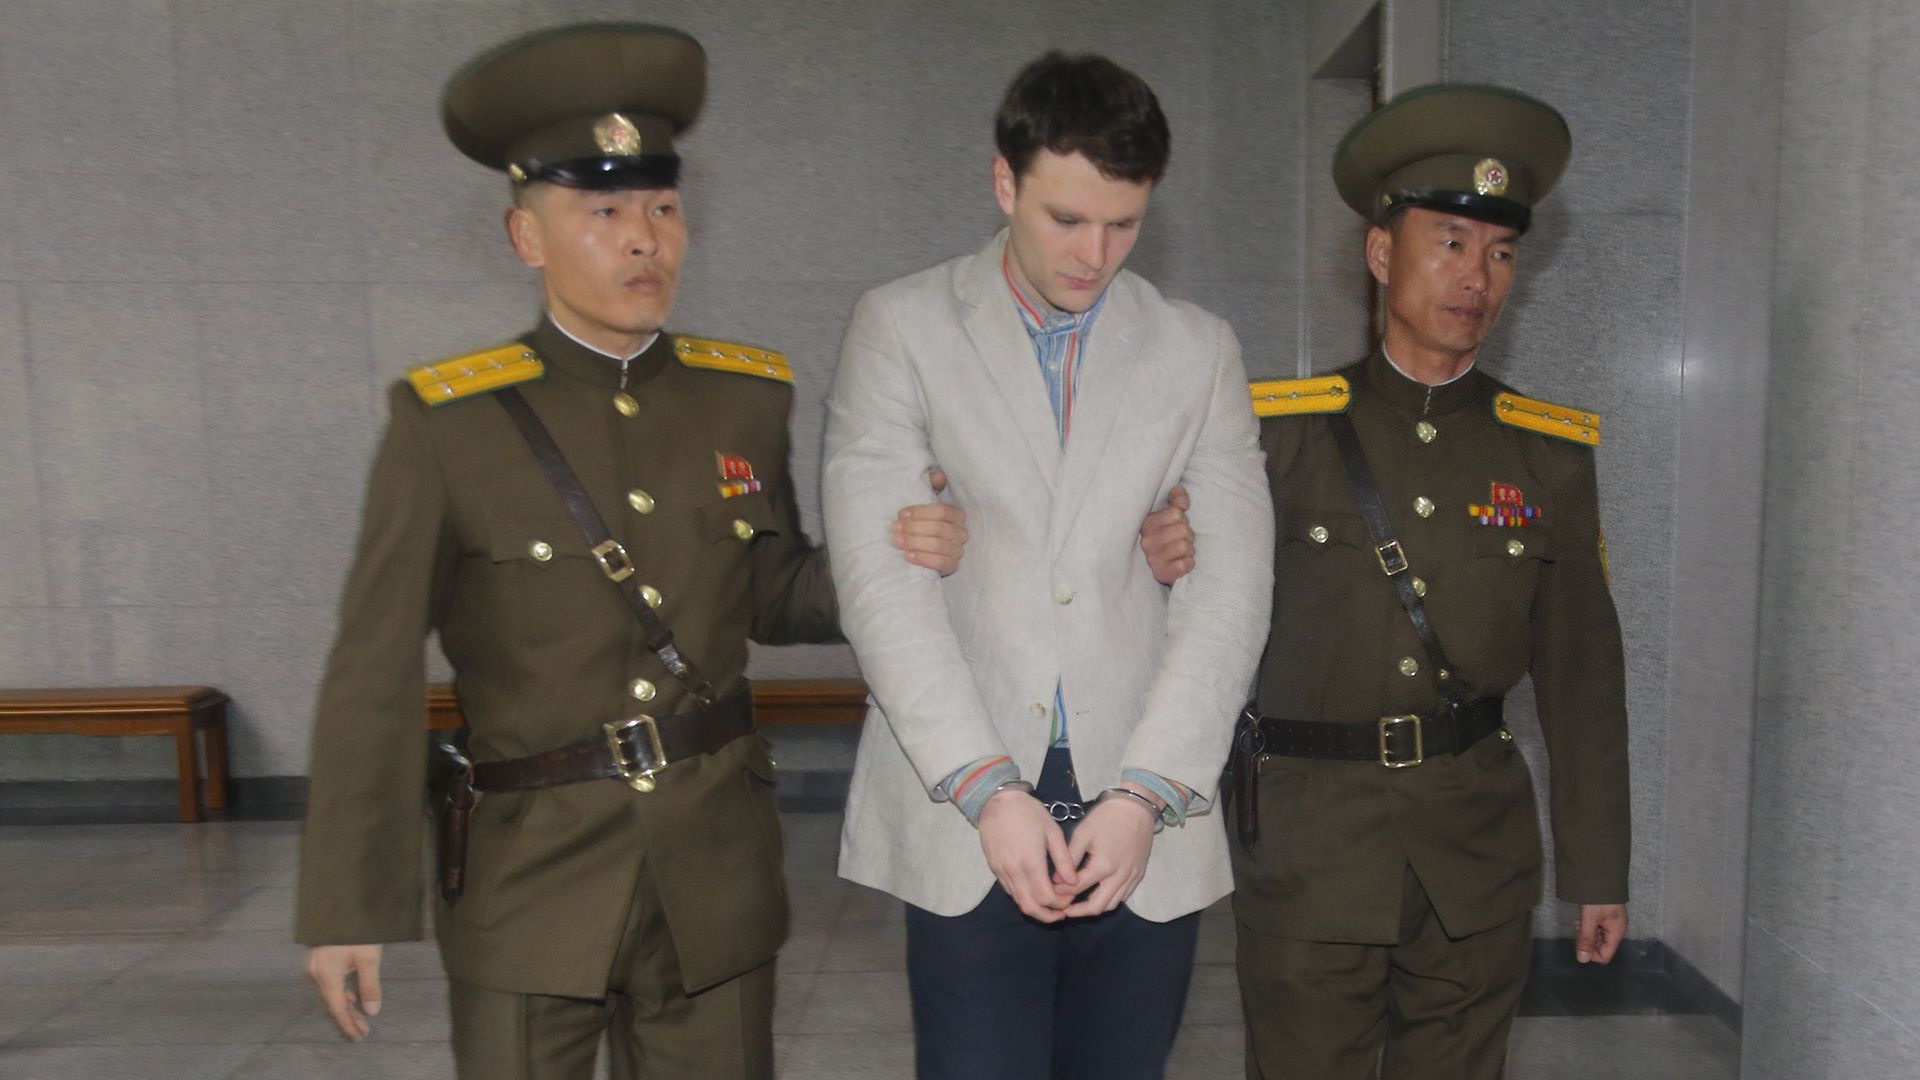 President Trump says North Korea's leader Kim Jong-un only learned about Otto Warmbier's death after the event.